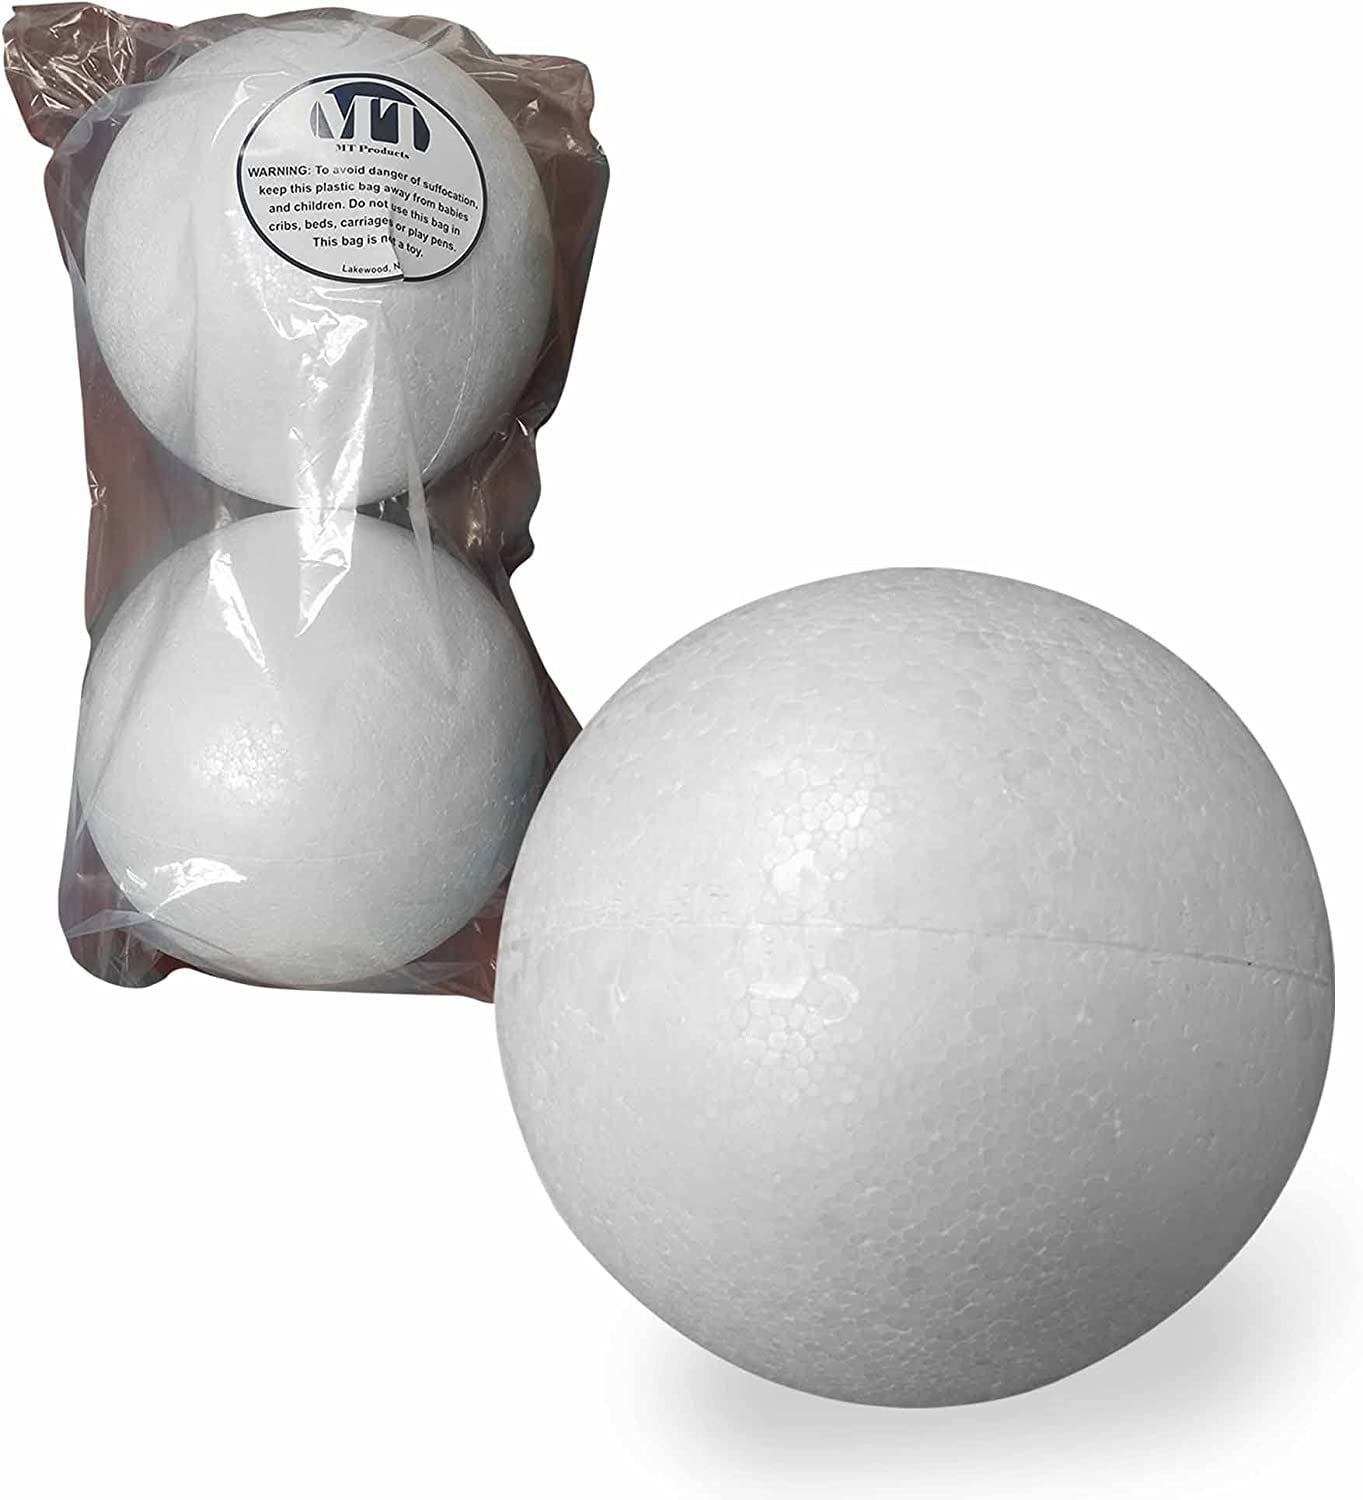 Smooth Foam 6-inch Ball for Crafts - Bulk 8 Pack - Plasteel Brand - Made in  The USA